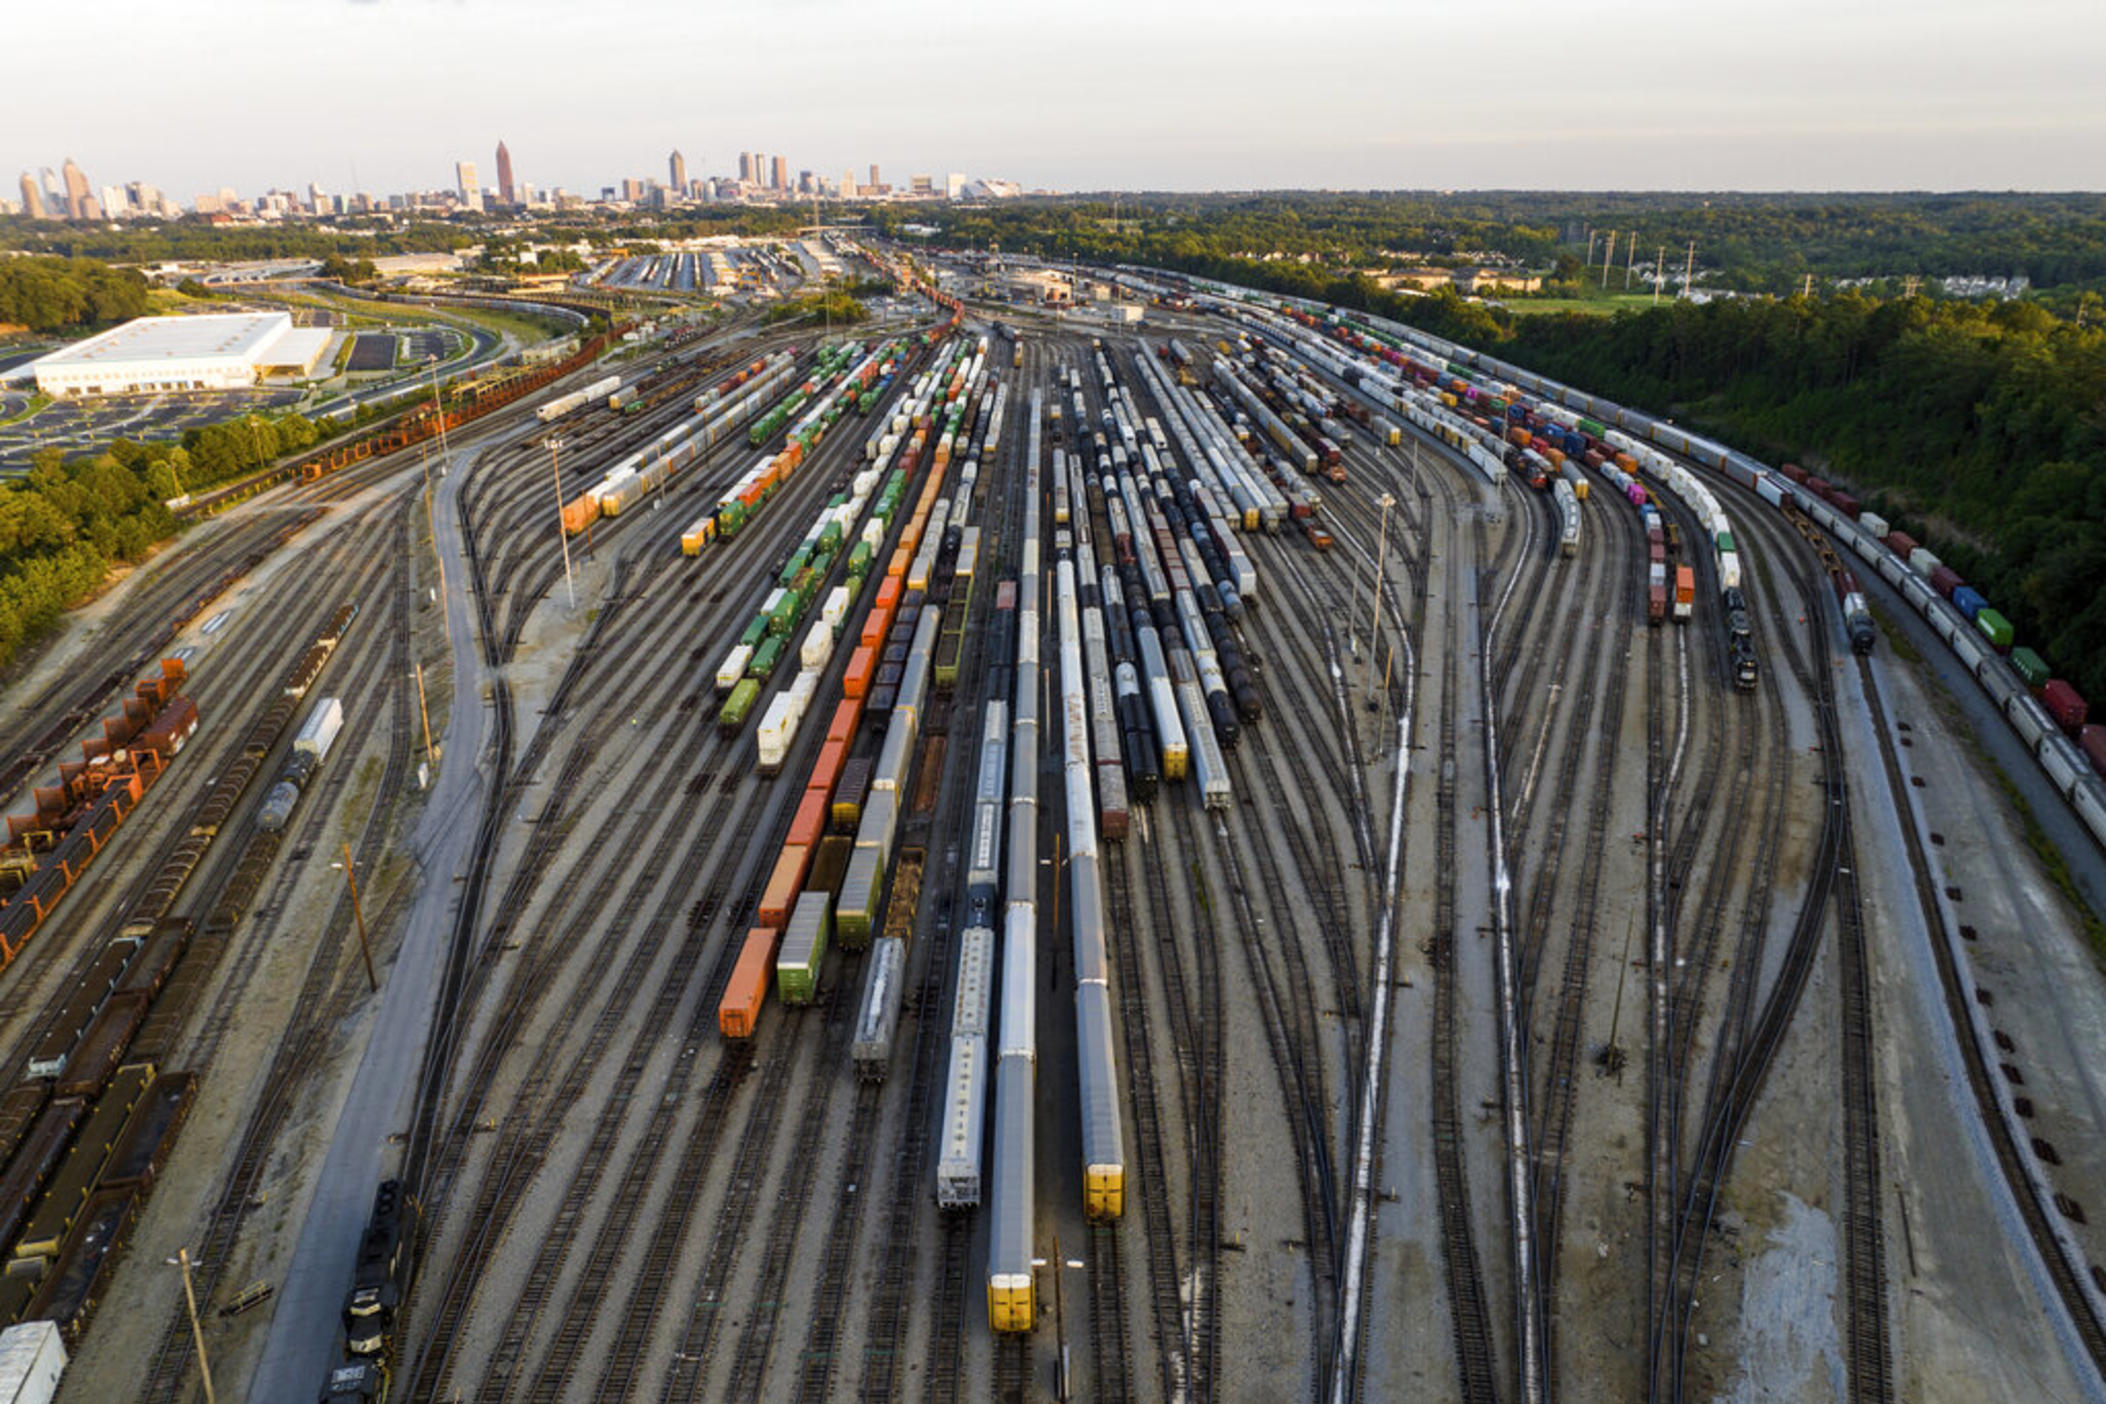  Freight train cars sit in a Norfolk Southern rail yard on Sept. 14, 2022, in Atlanta.